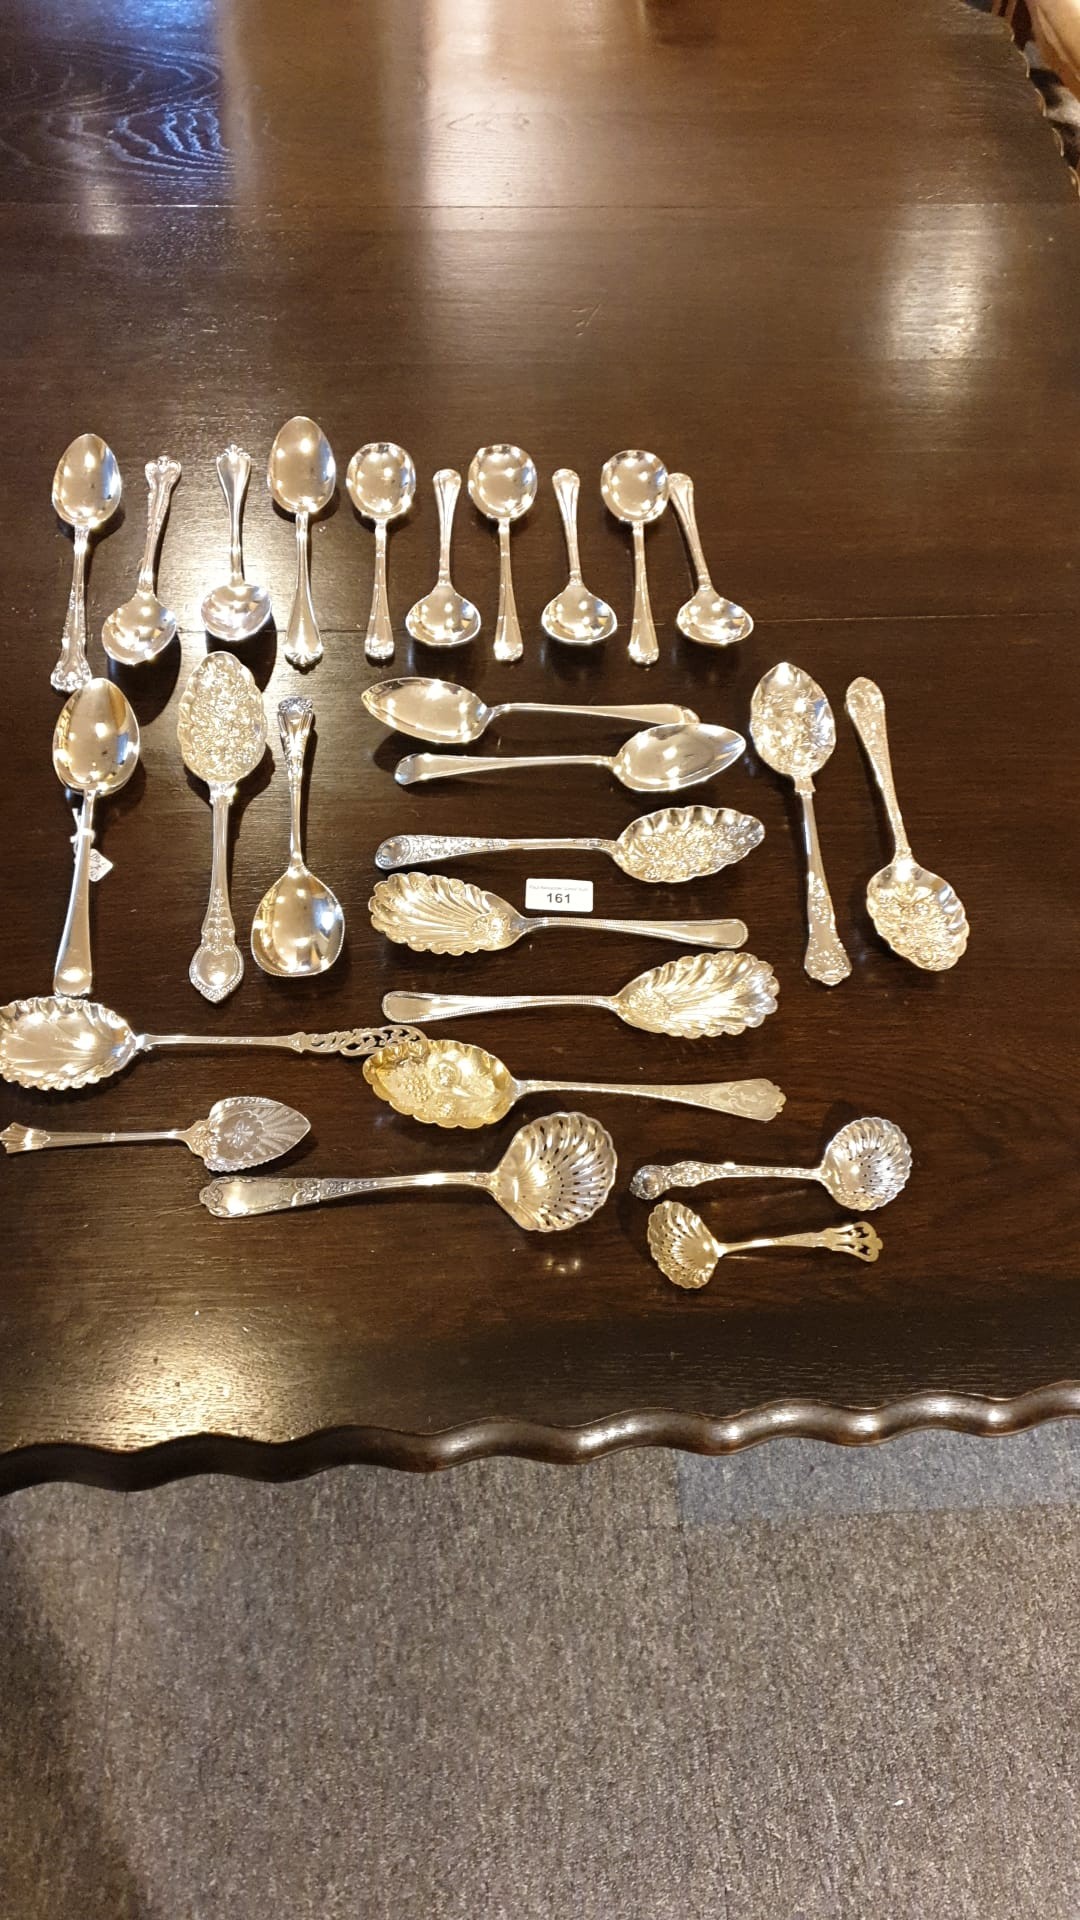 Large selection Berry Spoons Serving spoons Sifting ladles ect .